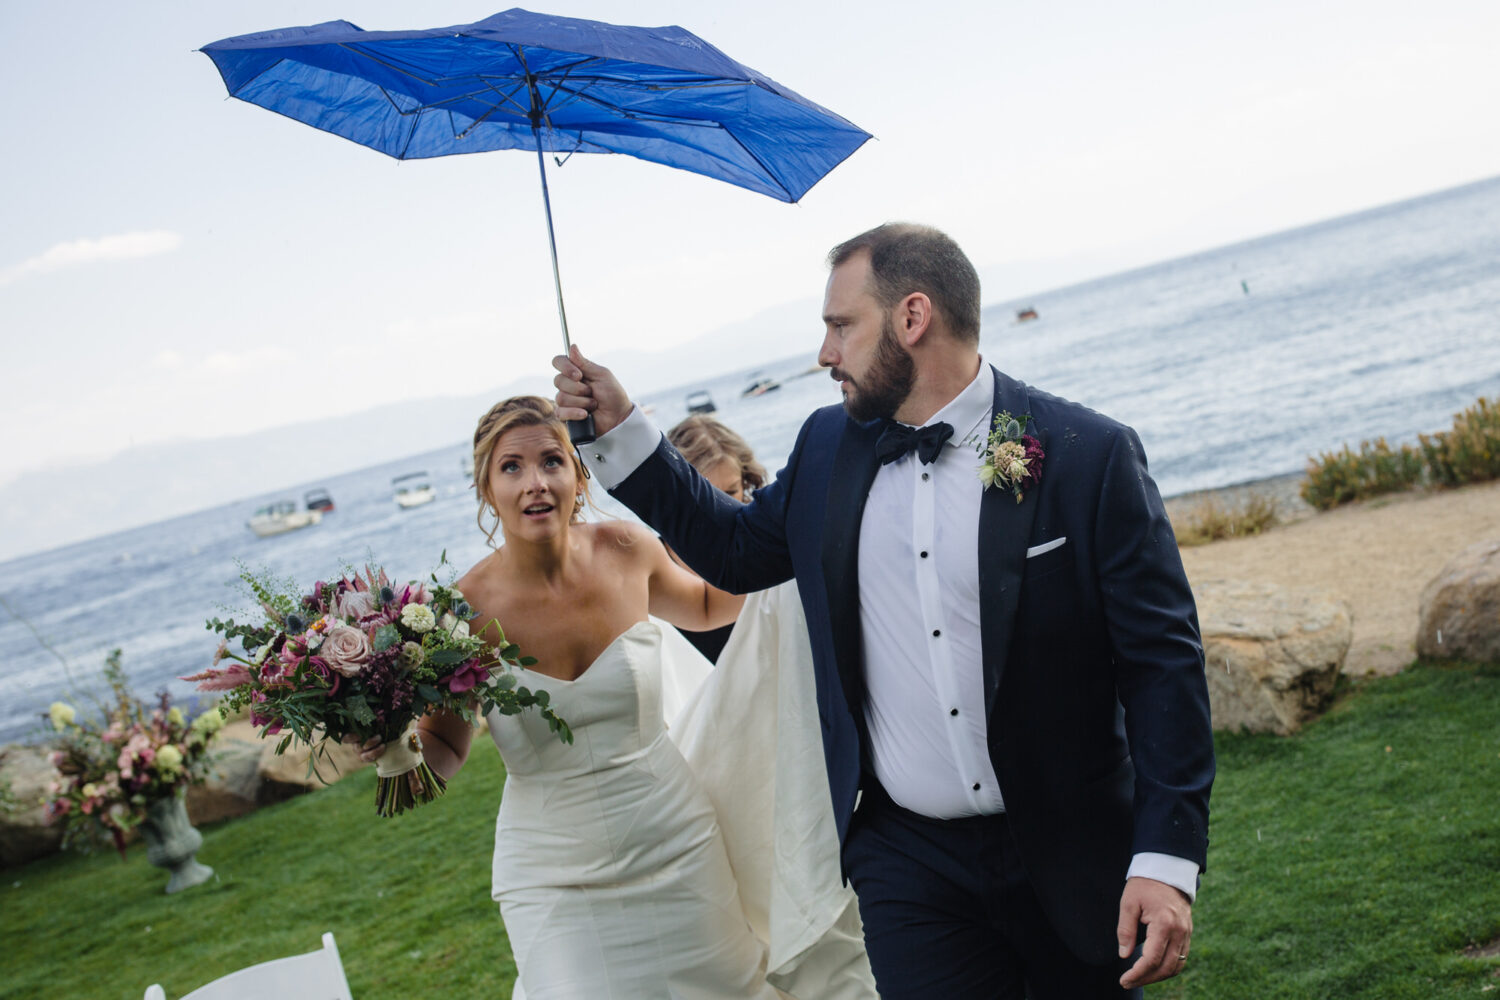 A rainy wedding day is good luck, even if your umbrella is broken.